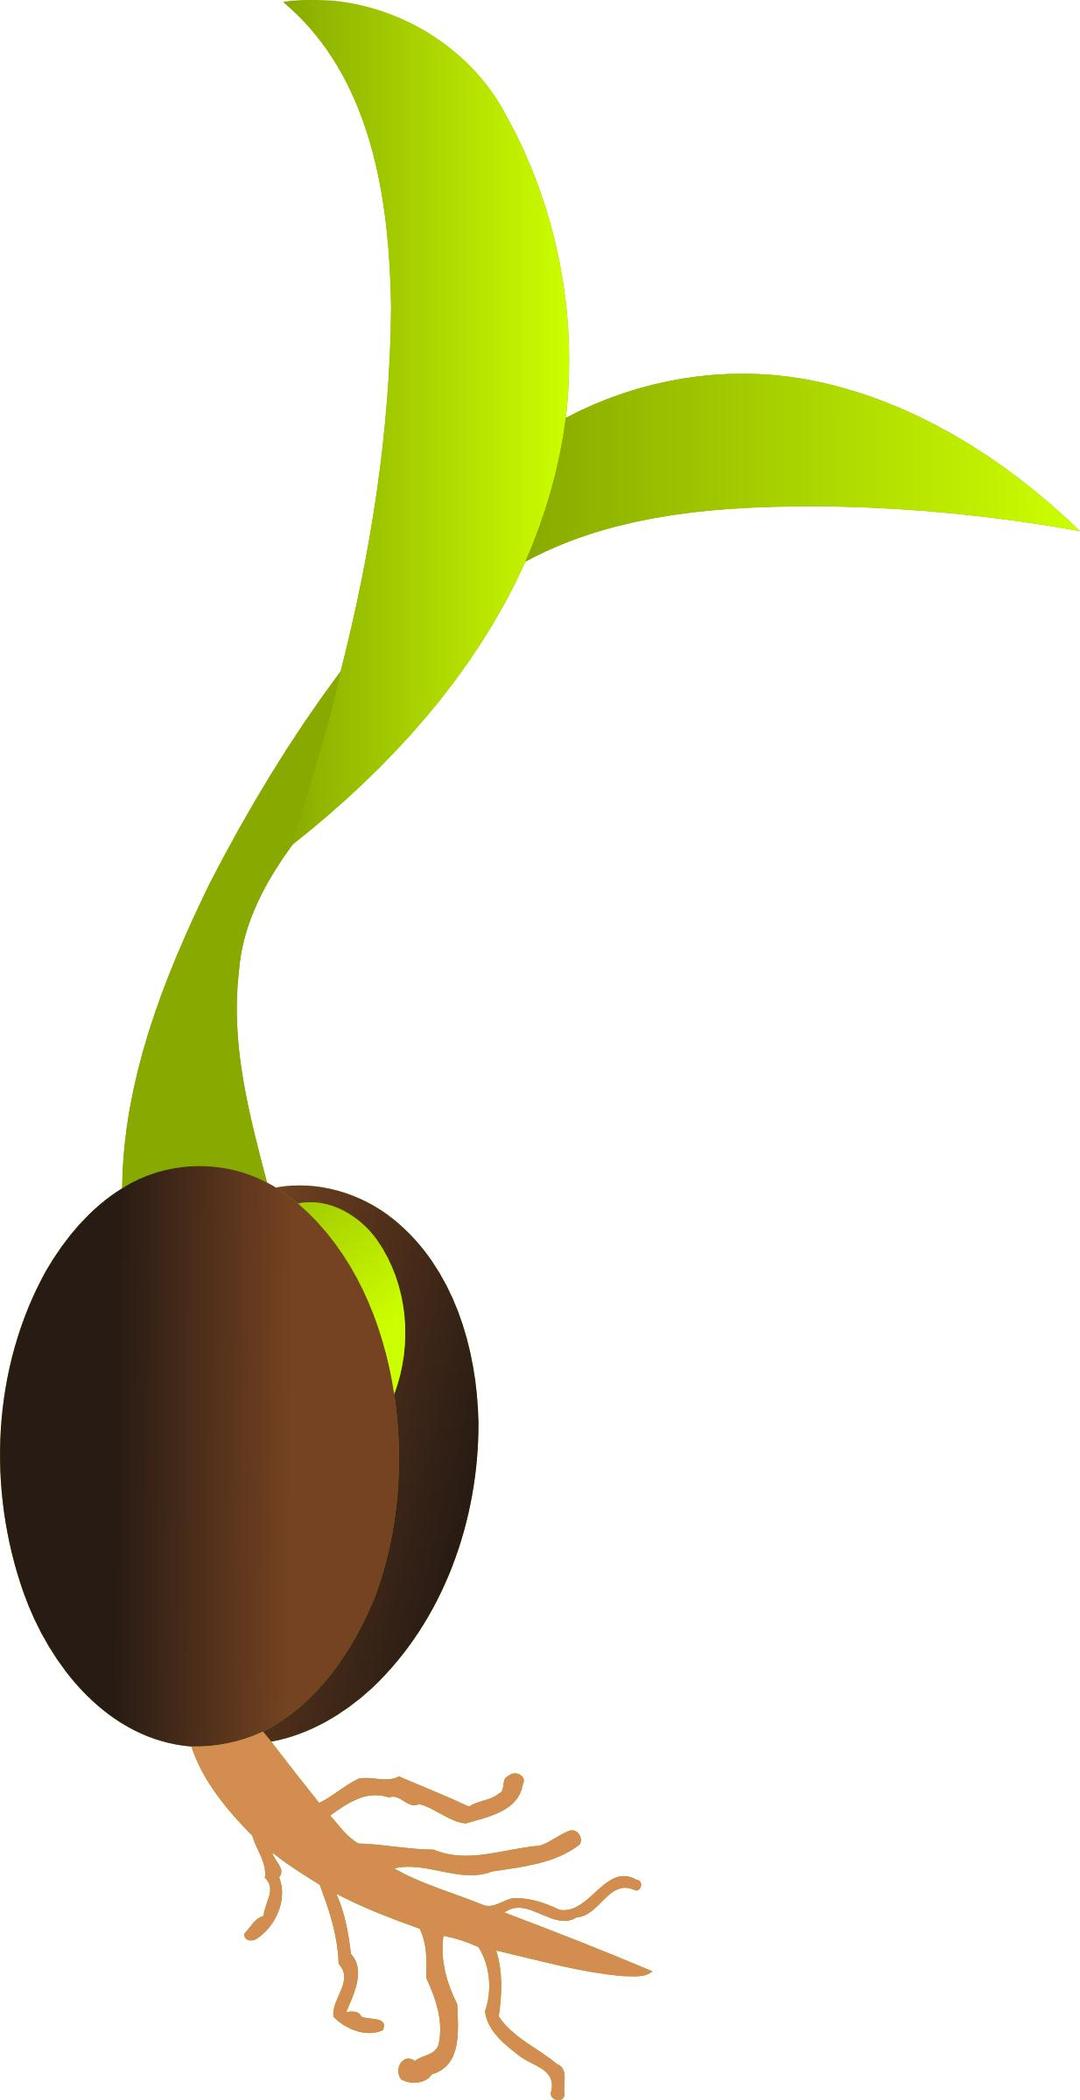 Germinating seed vectorized png transparent